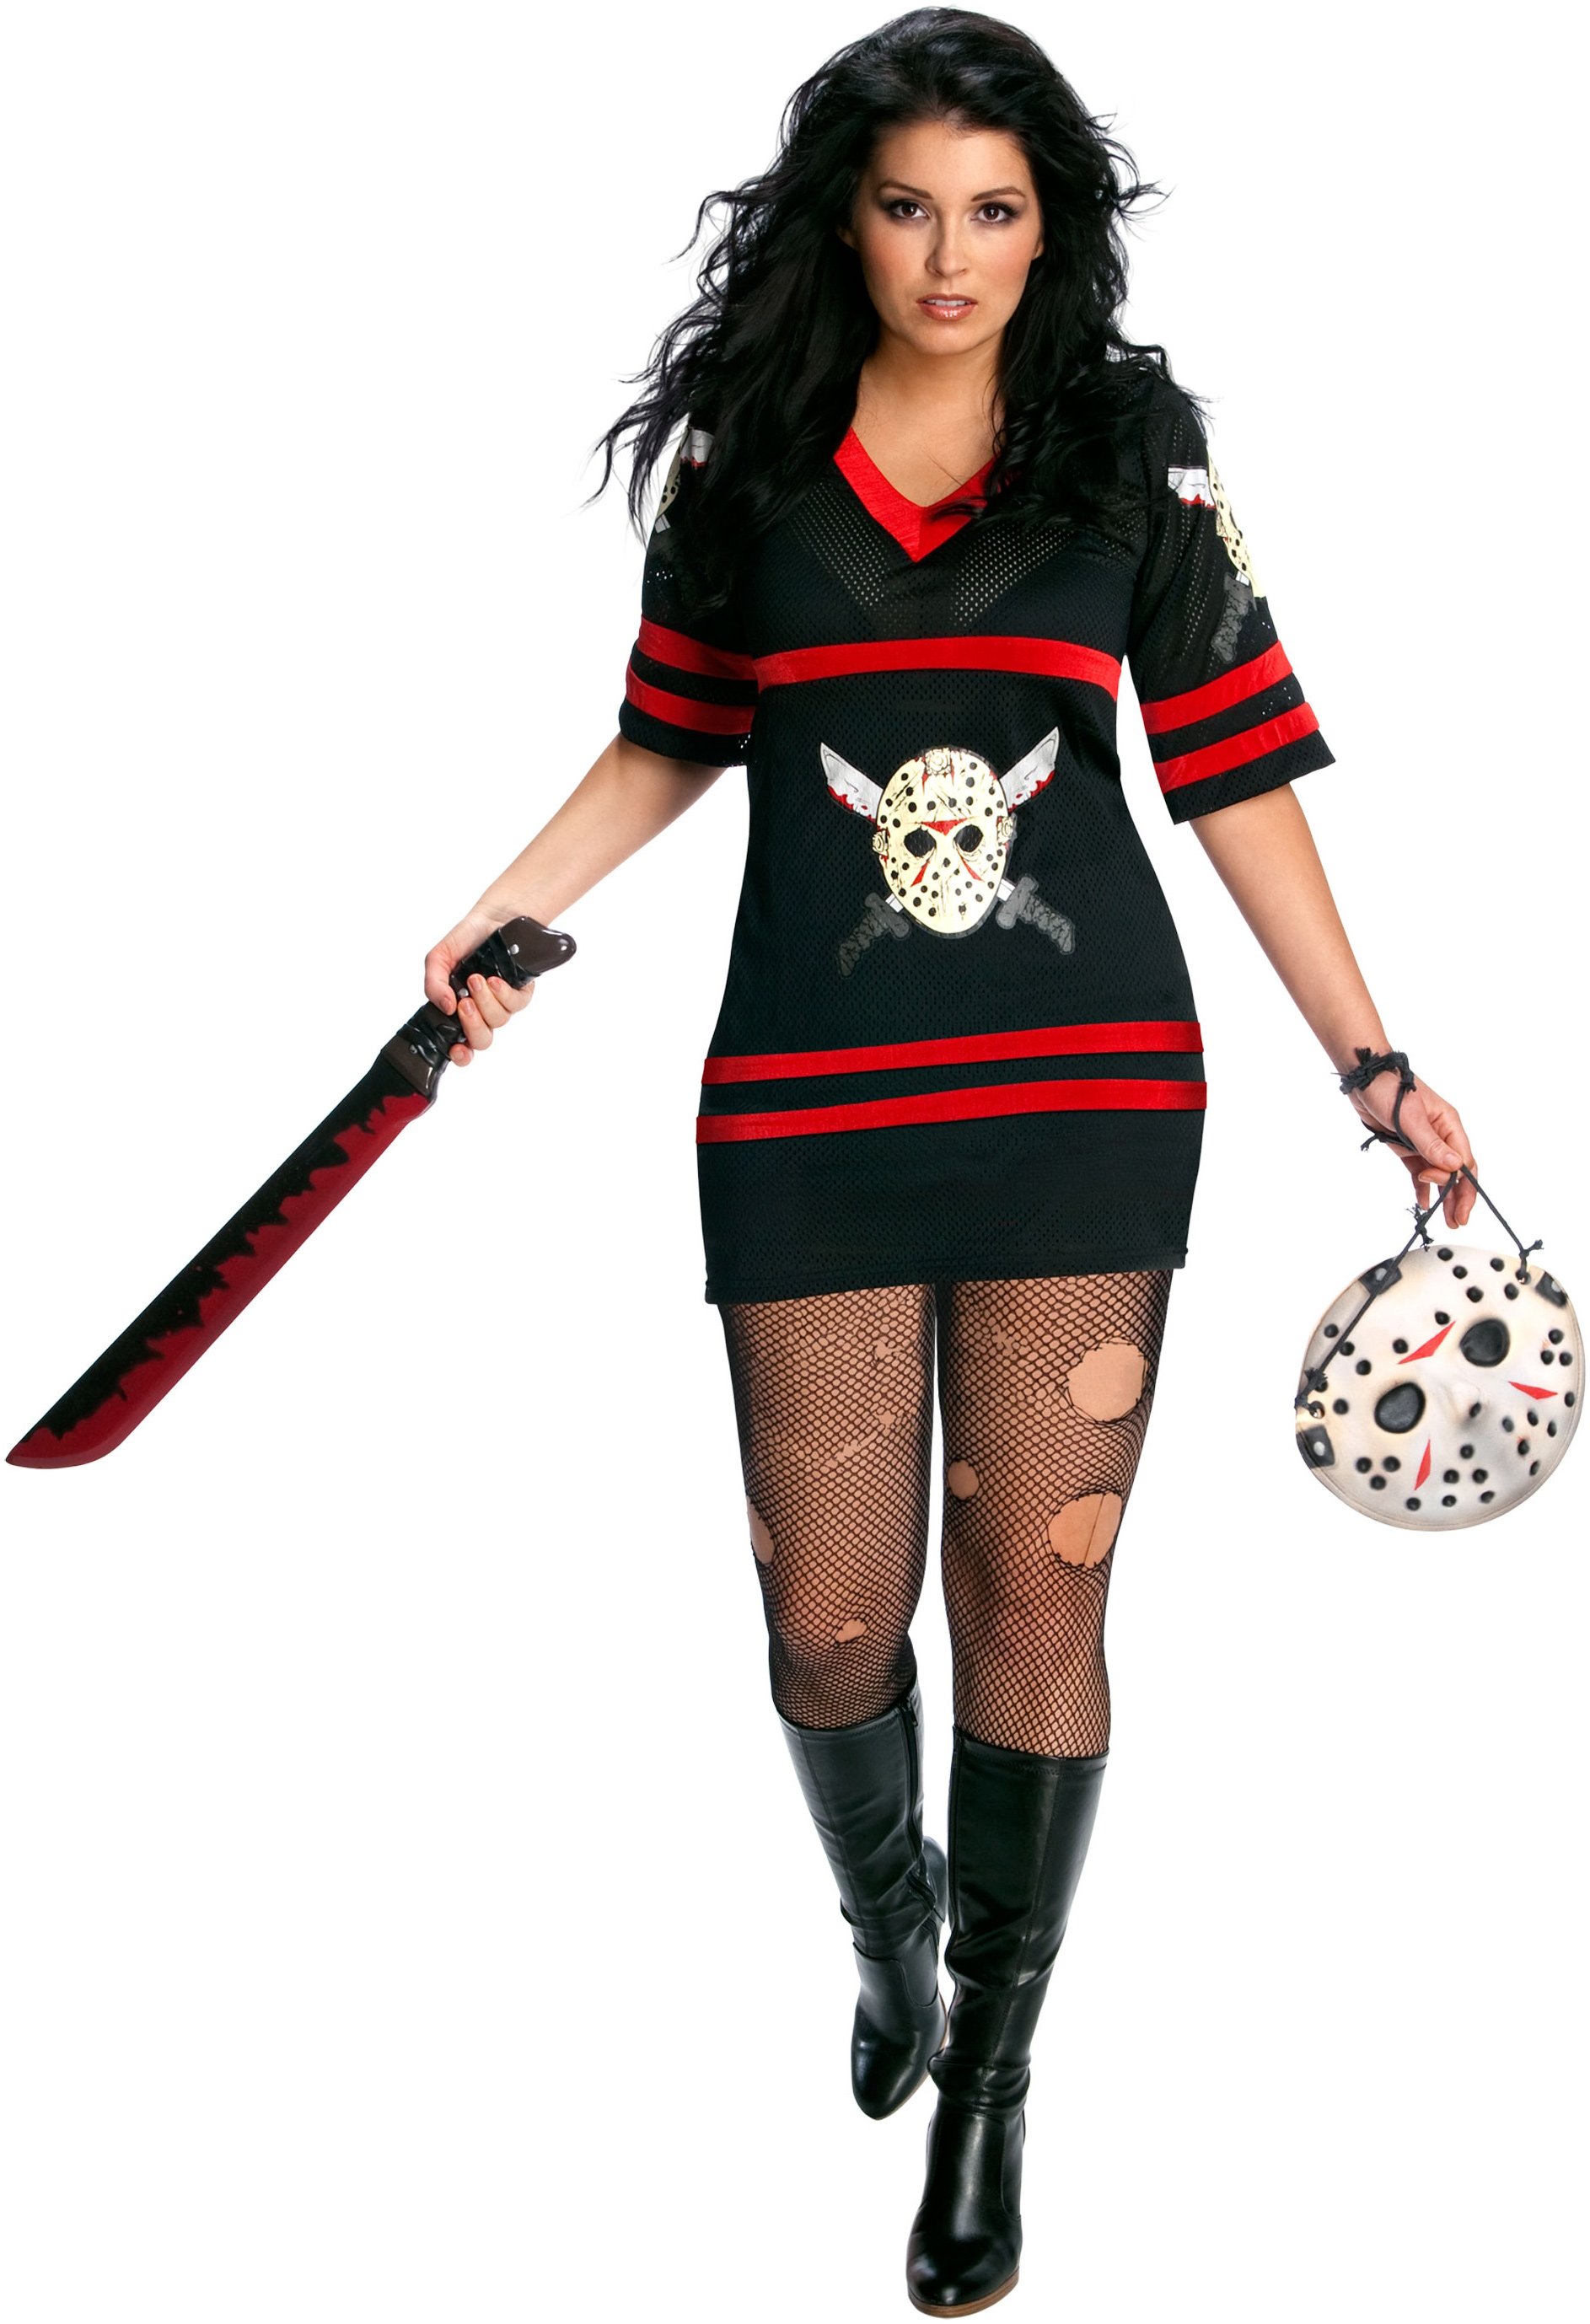 Friday The 13th - Sexy Miss Voorhees Plus Adult Costume - Click Image to Close